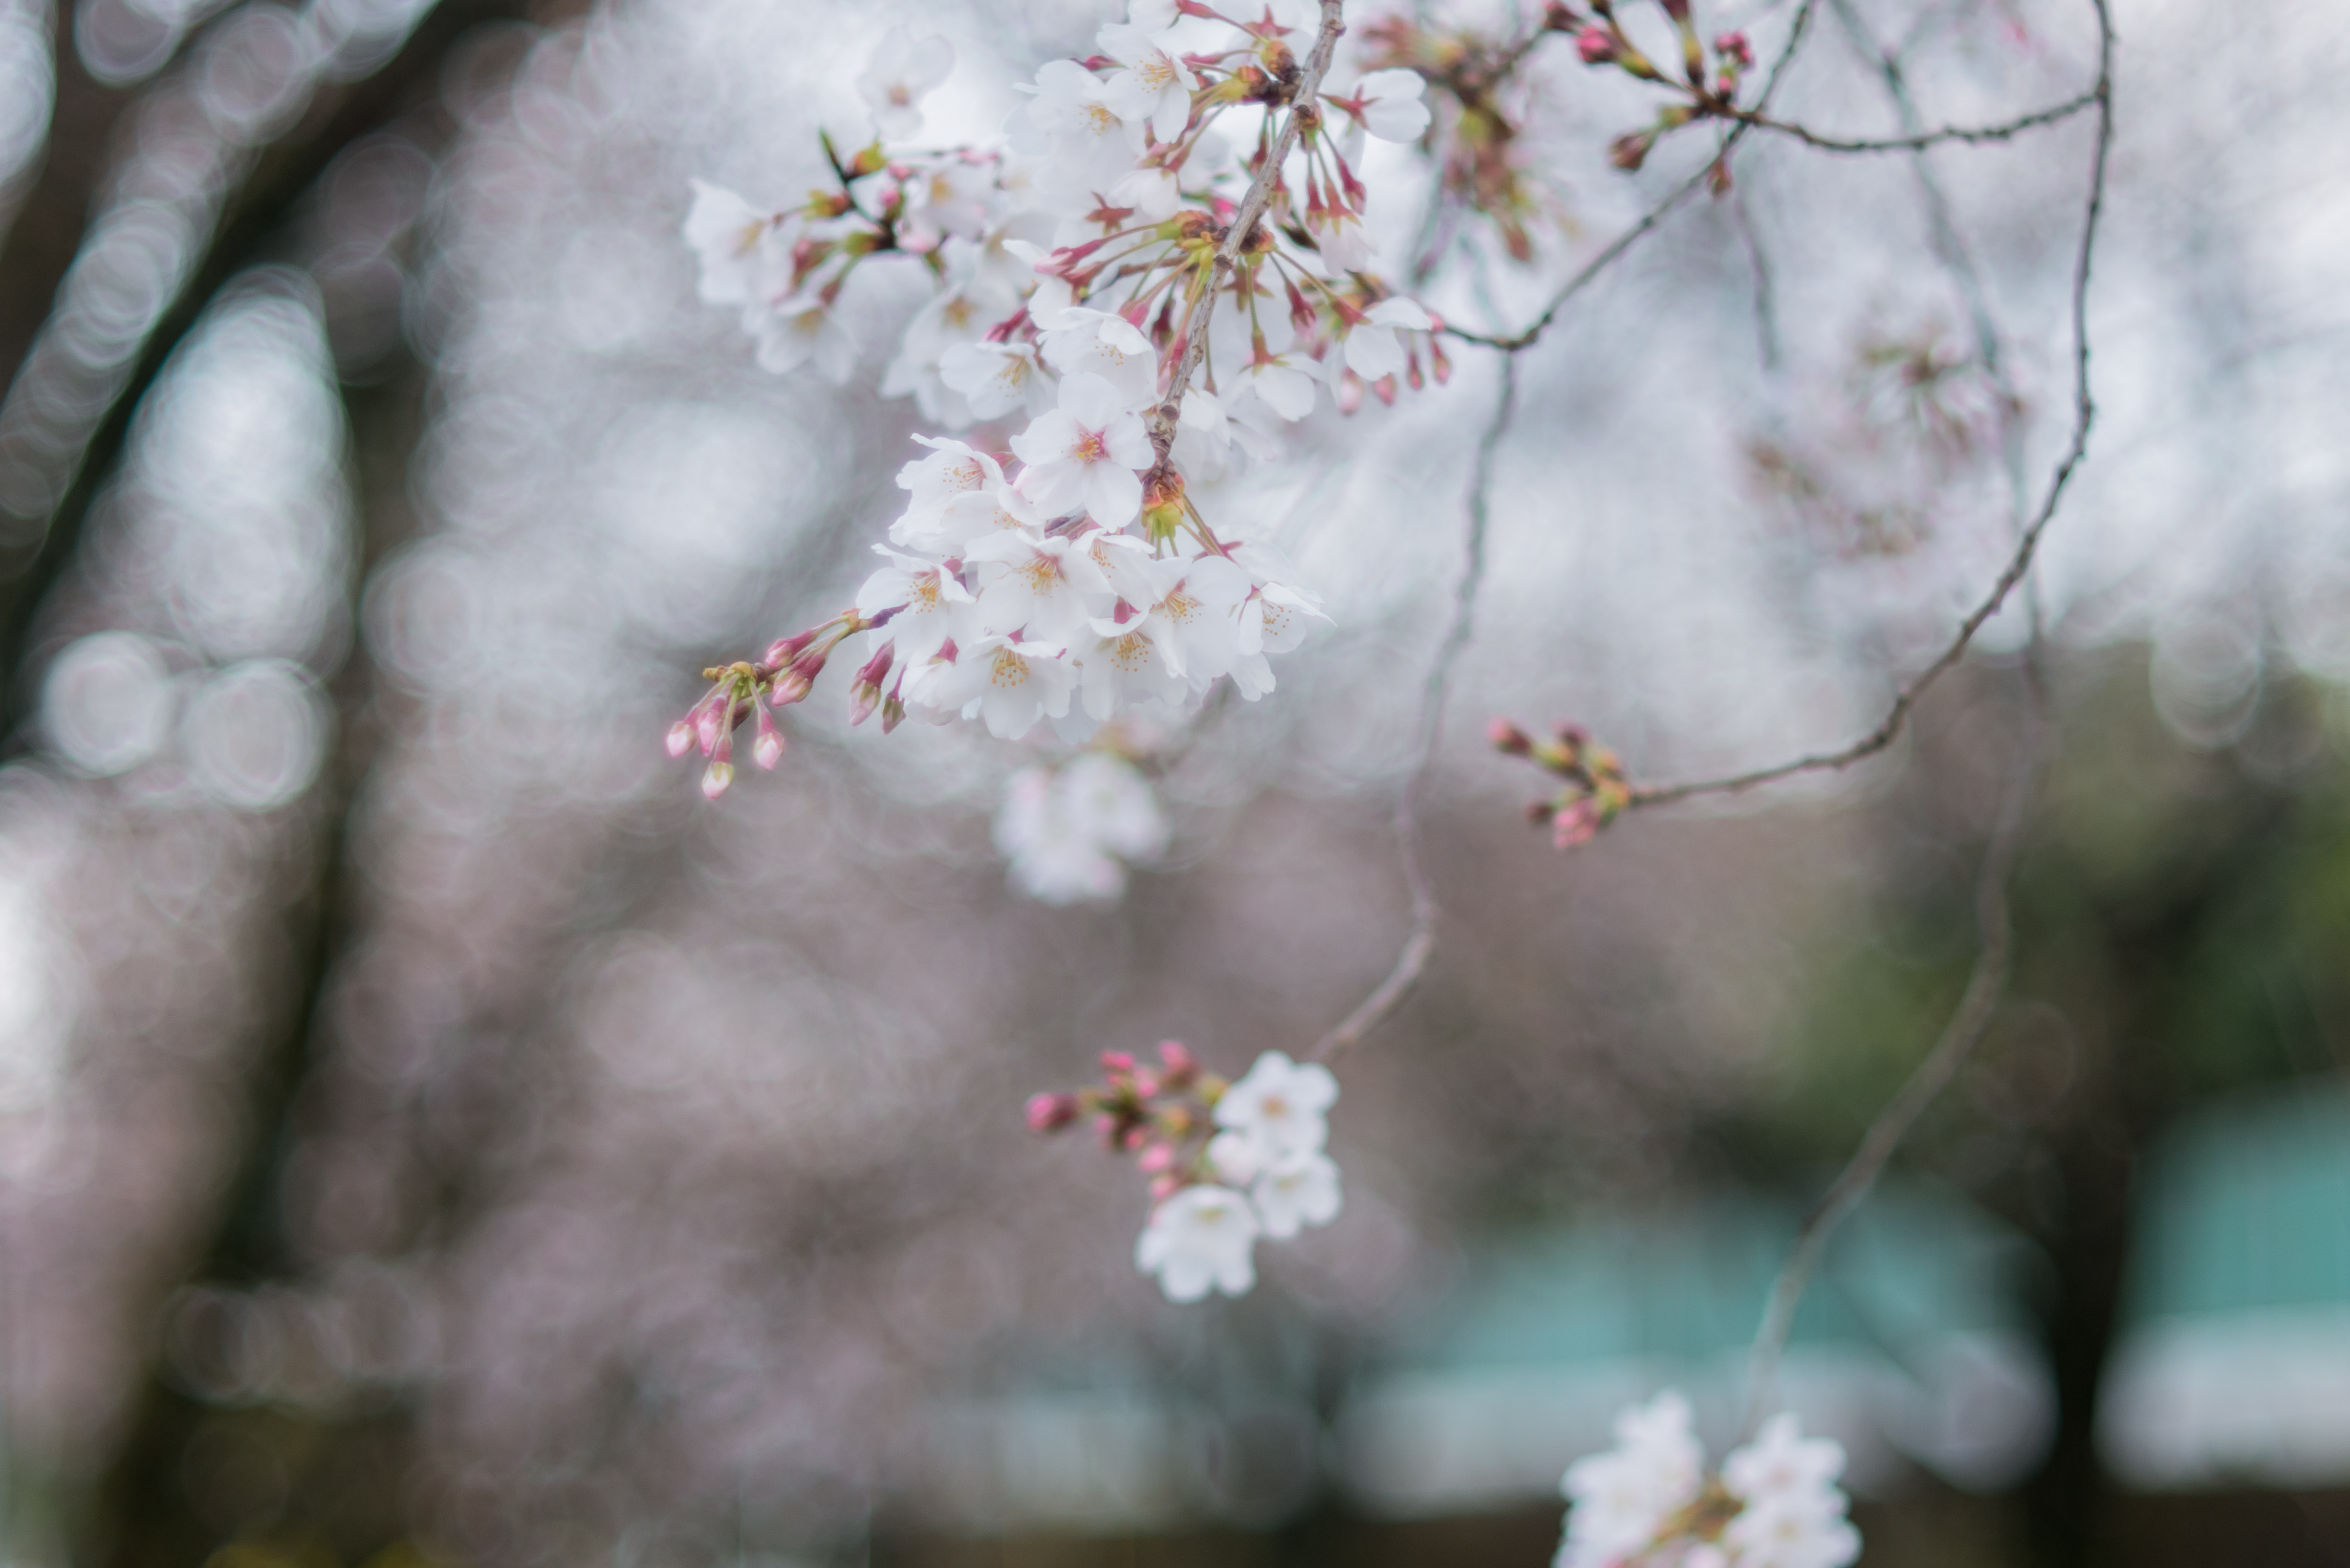 General 4592x3064 cherry blossom Japan spring floral trees winter bokeh depth of field